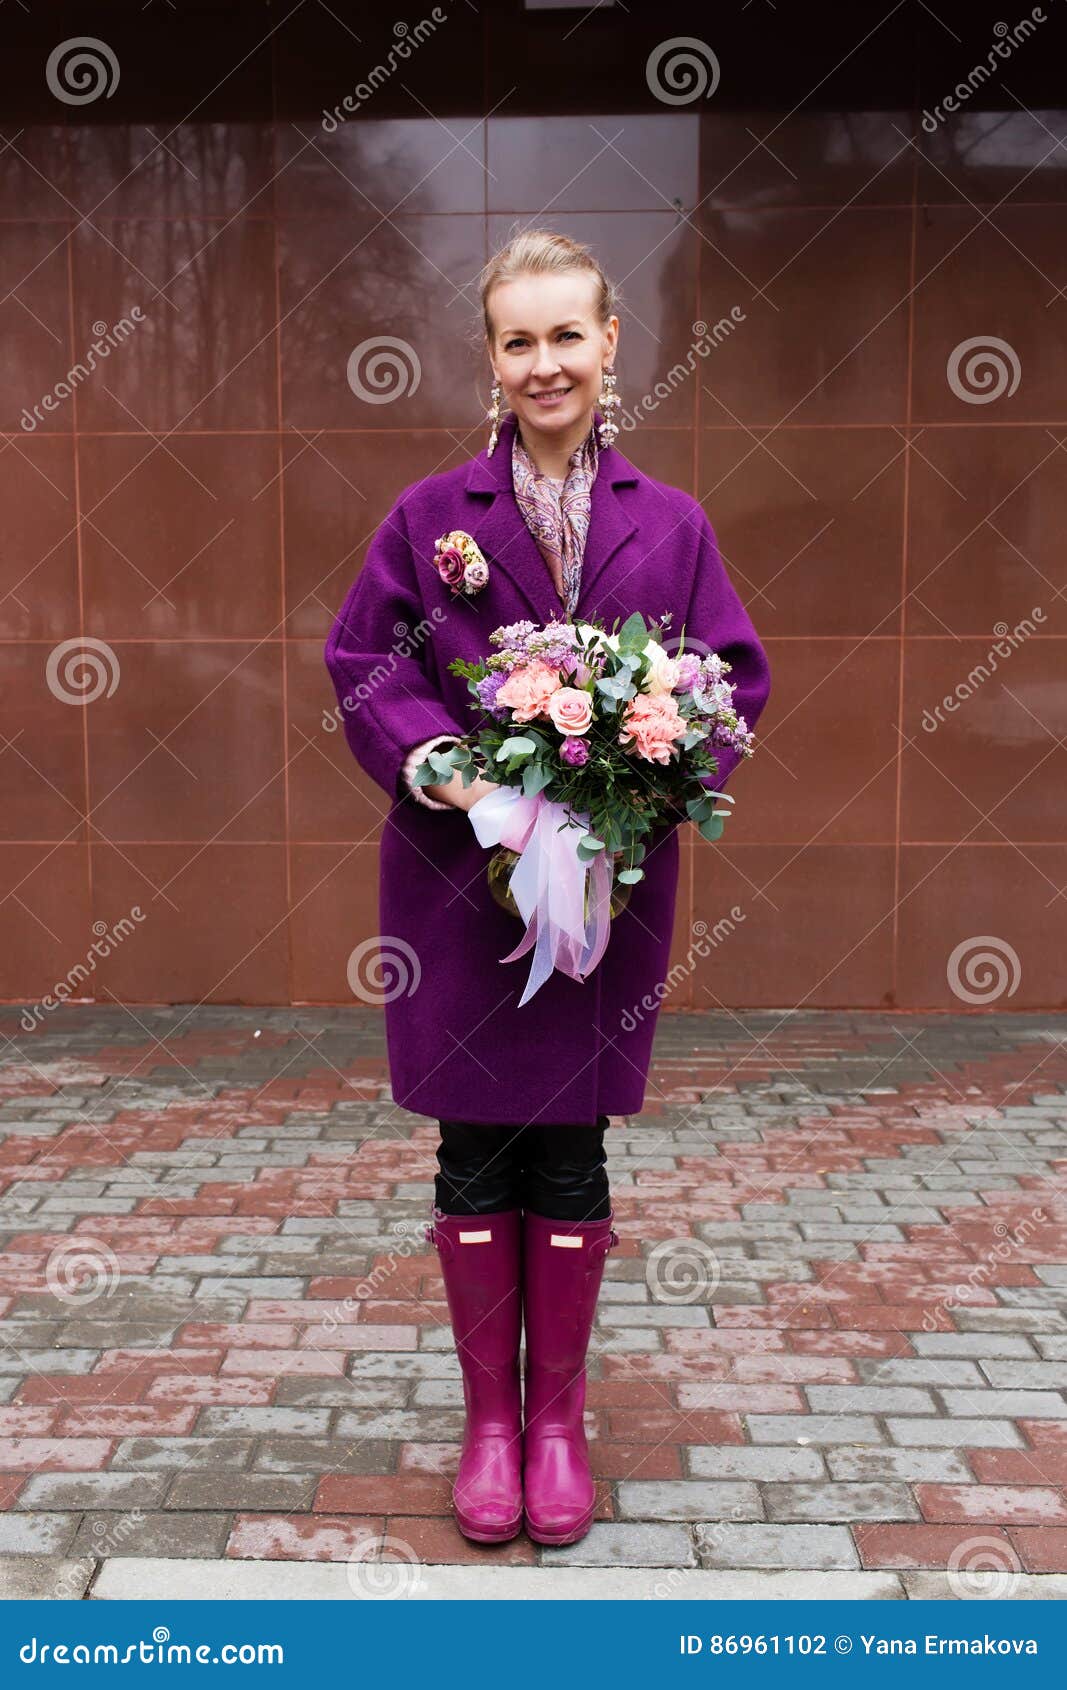 woman holding beautiful bouquet of flowers